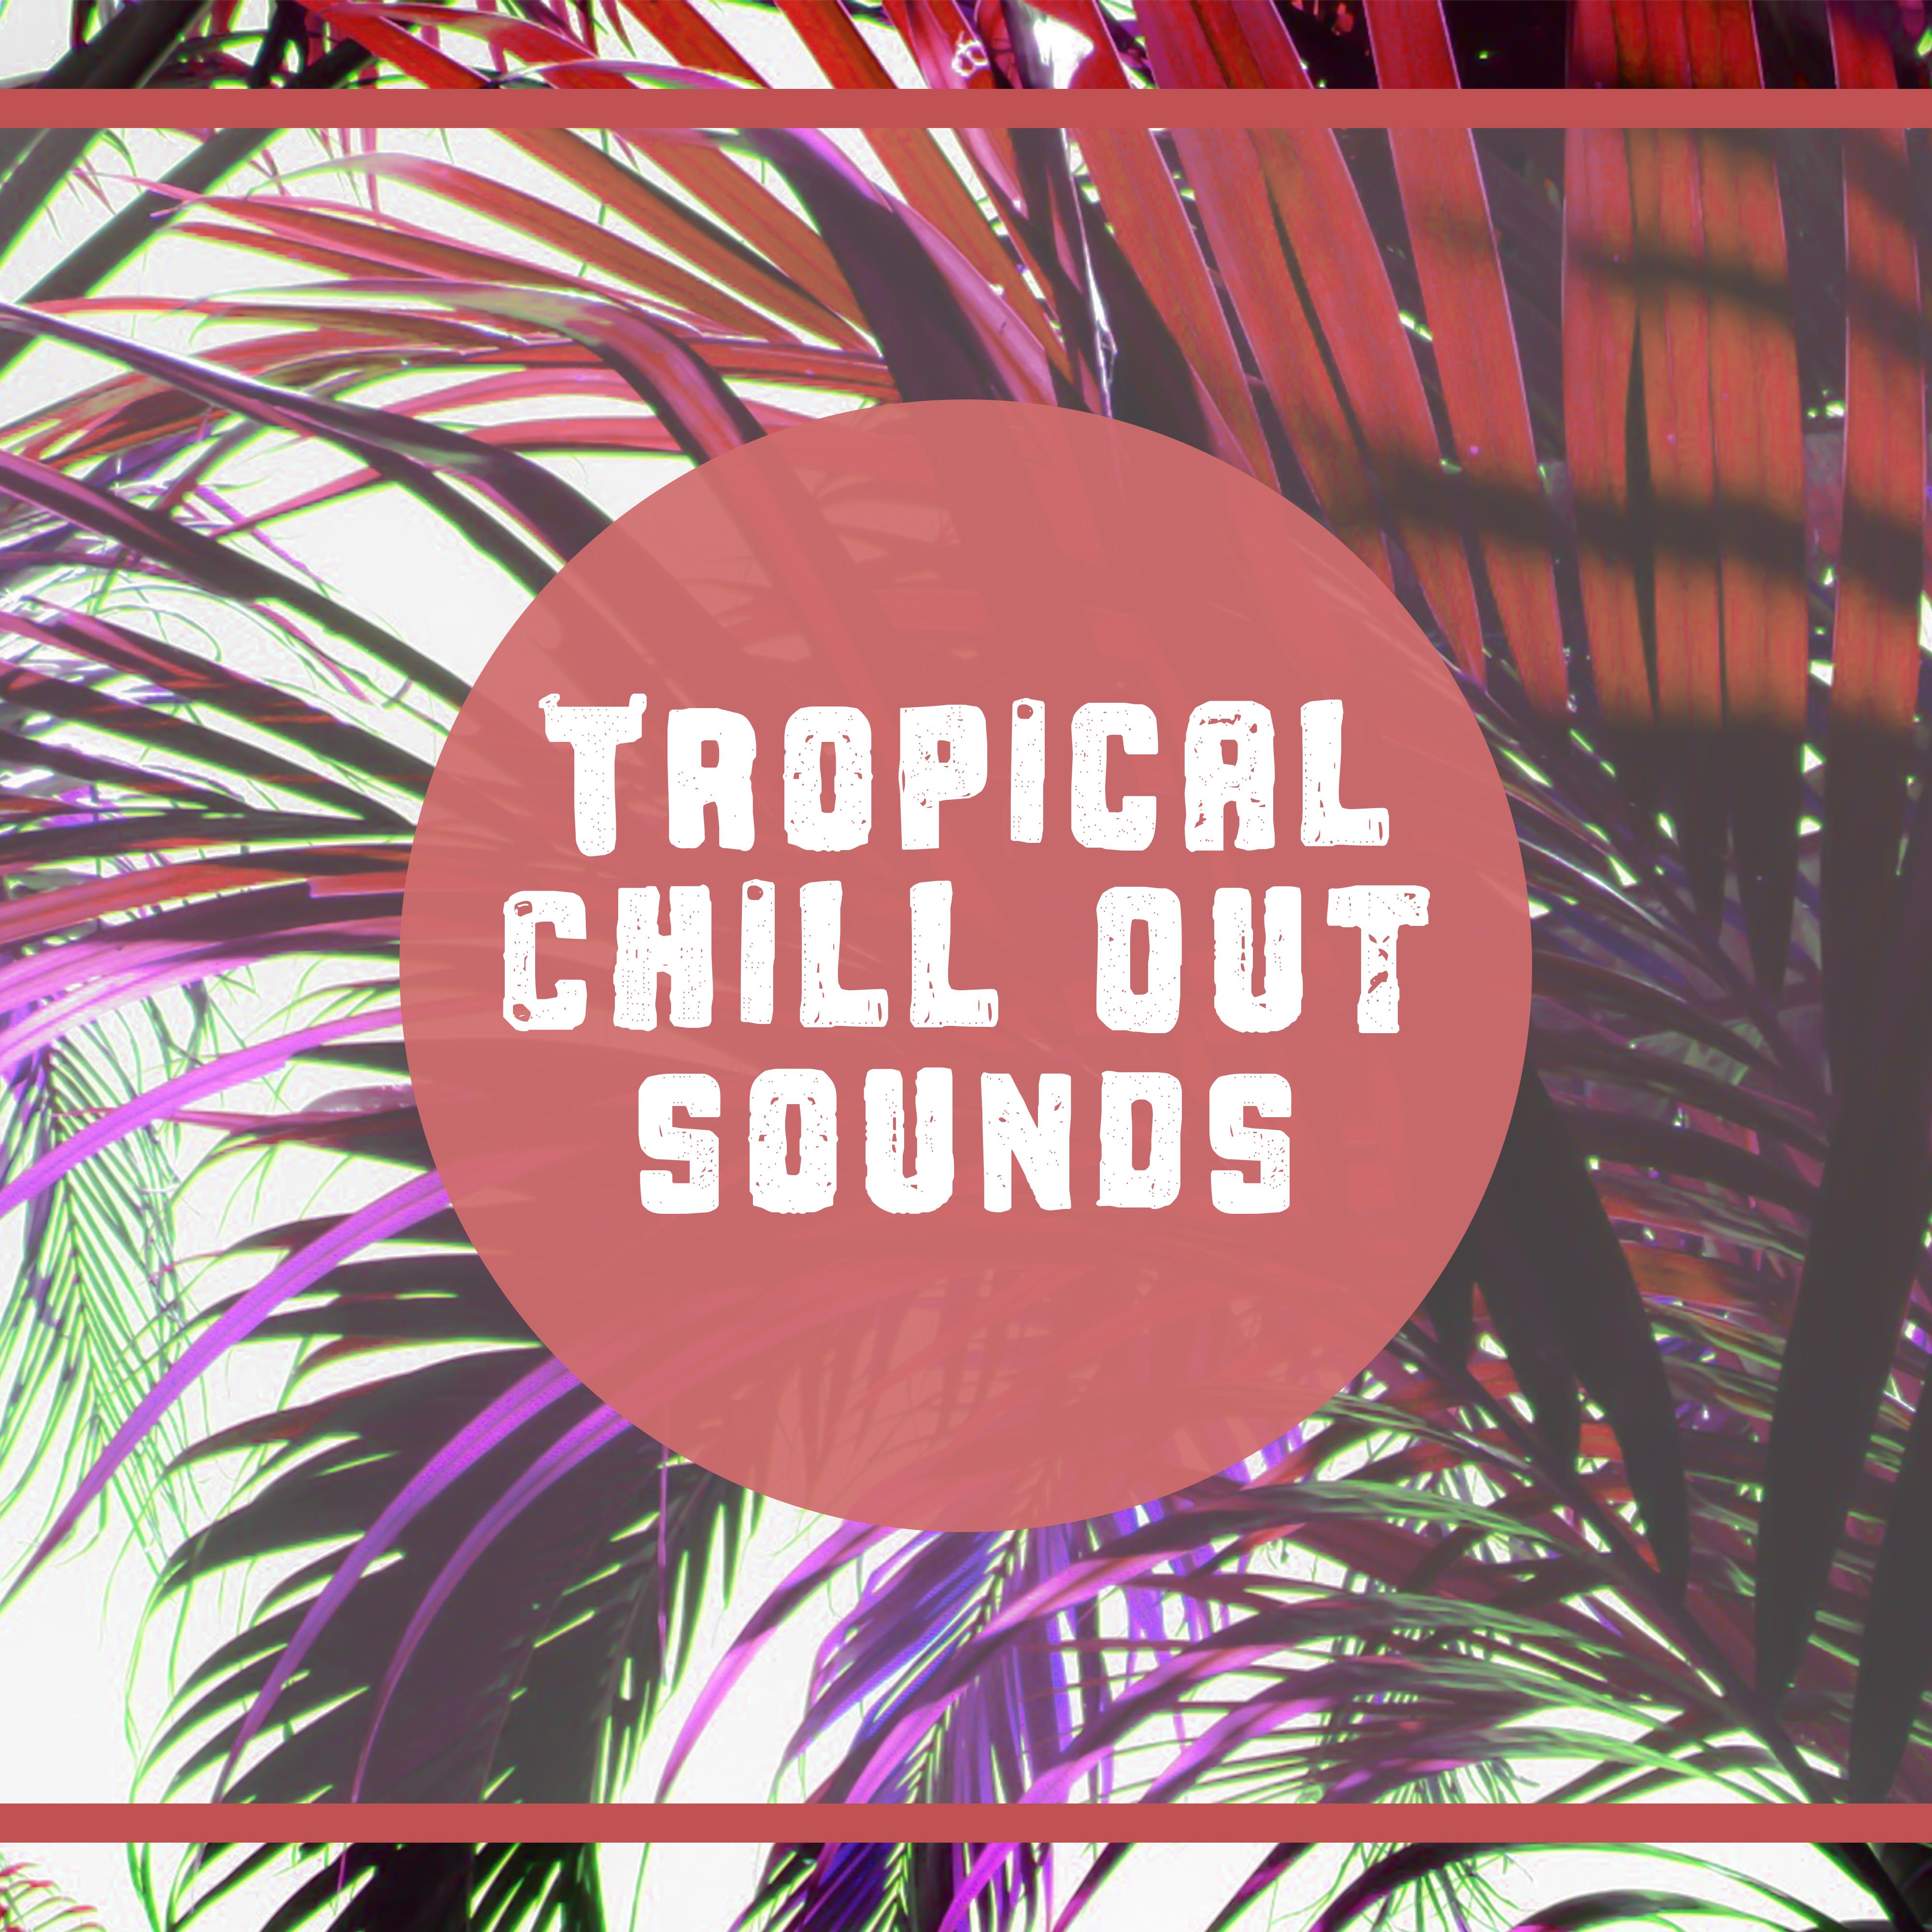 Tropical Chill Out Sounds  Calming Chill Out Music, Sounds to Relax, Chillout Vibes